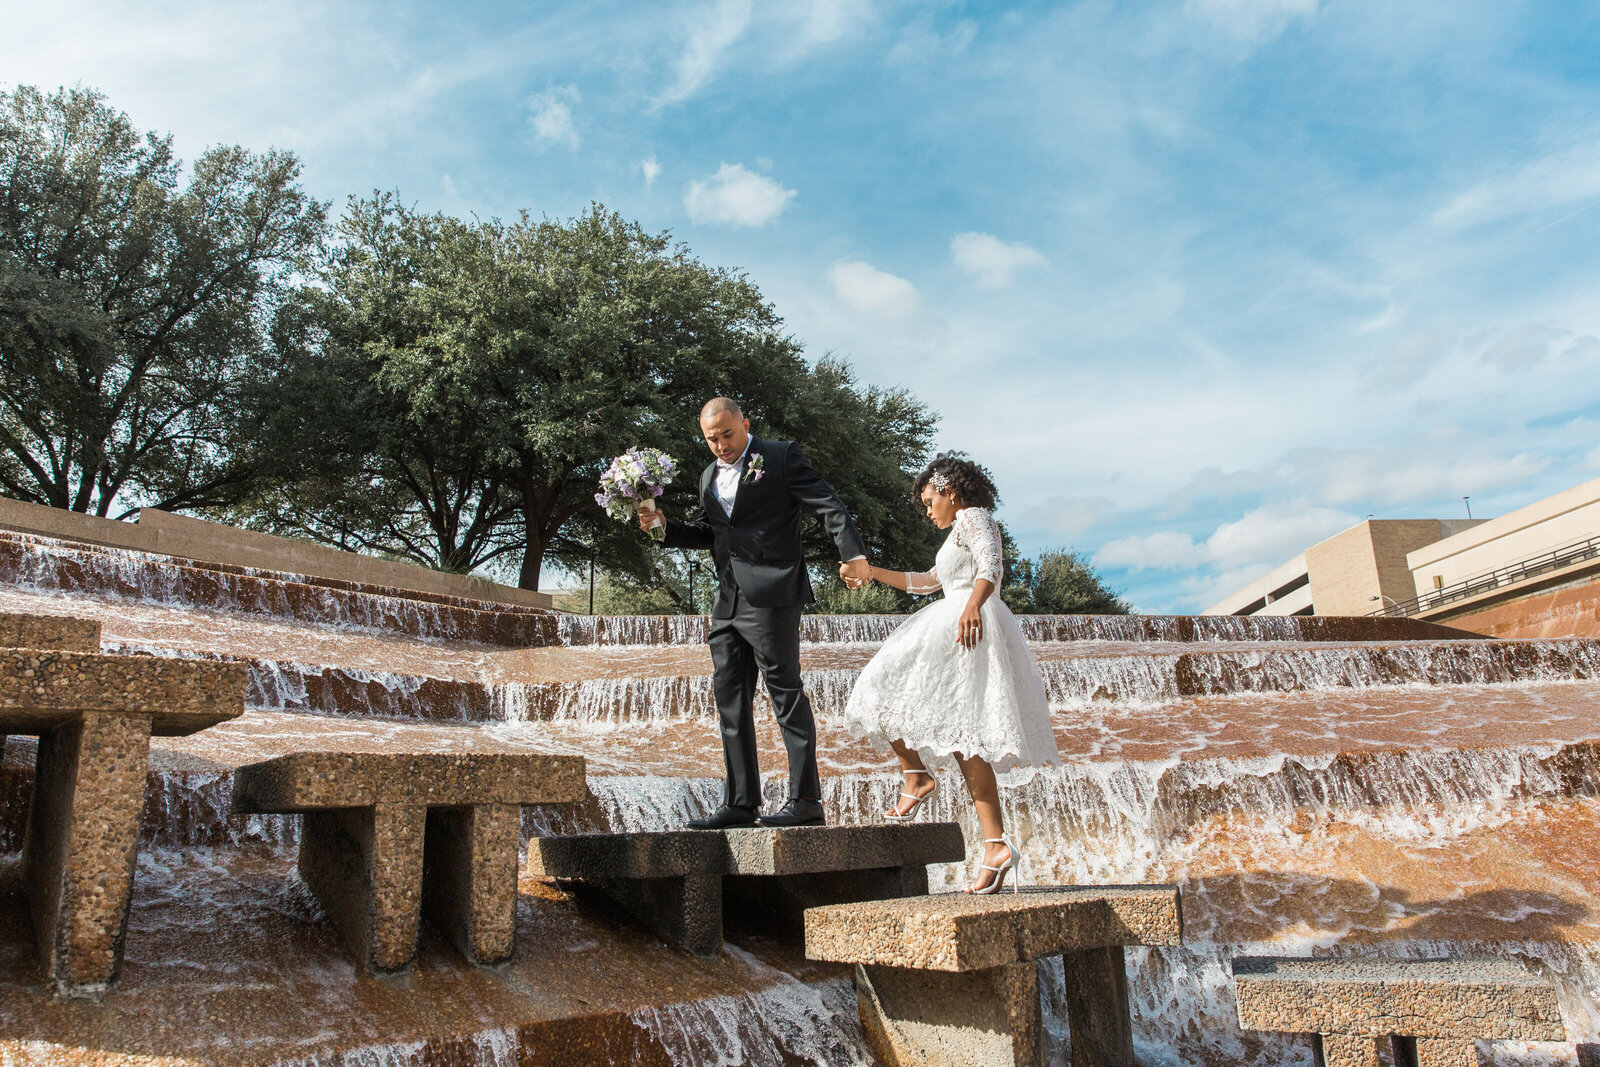 A groom leading a bride across the steps of an intricate water fountain at the Fort Worth Water Gardens in Fort Worth Texas. The bride is on the right and is wearing a short white lace dress with white heels. The groom is on the left and is wearing a black tuxedo with a boutonniere and is holding a bouquet. The steps they're on are surrounded by many levels of waterfalls.